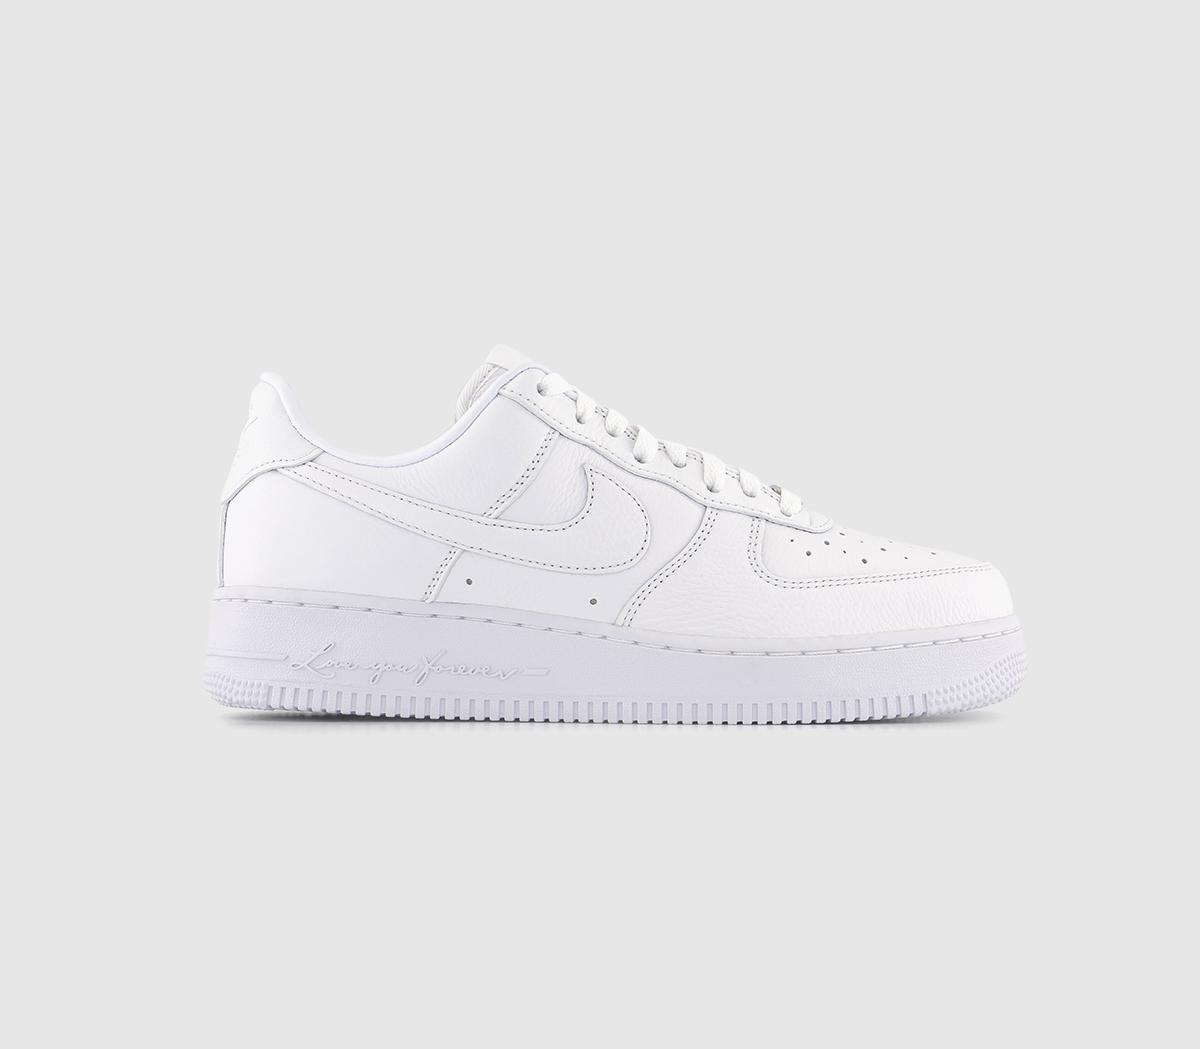 Nike Air Force 1 Low SP Trainers Drake White White Cobalt Tint - Men's ...